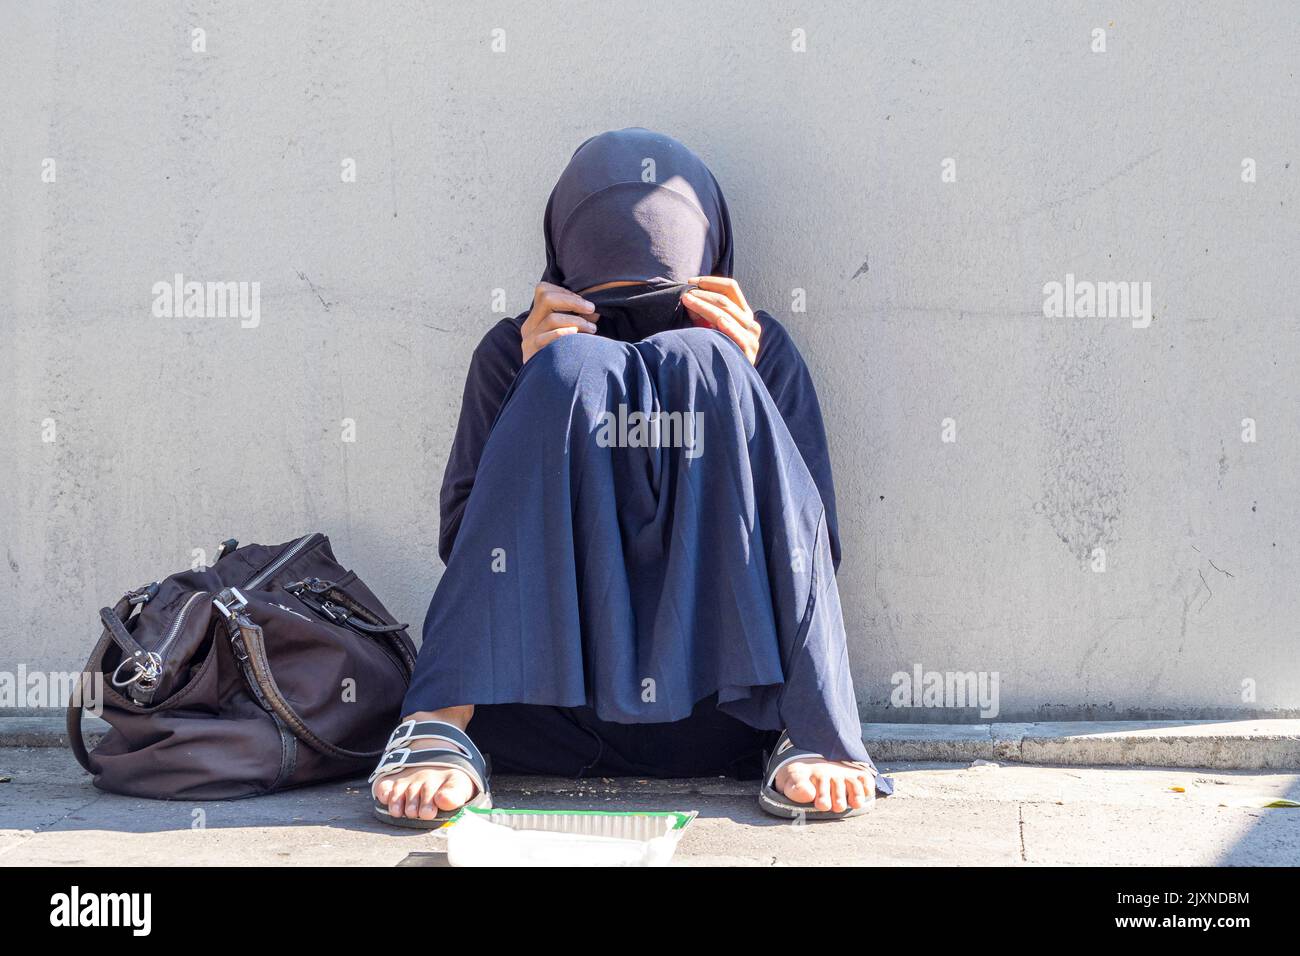 ISTANBUL - OCT 22: Muslim girl, woman sitting in a street of the city. Muslim woman with closed face begging for alms in Istanbul, October 22. 2021 in Stock Photo